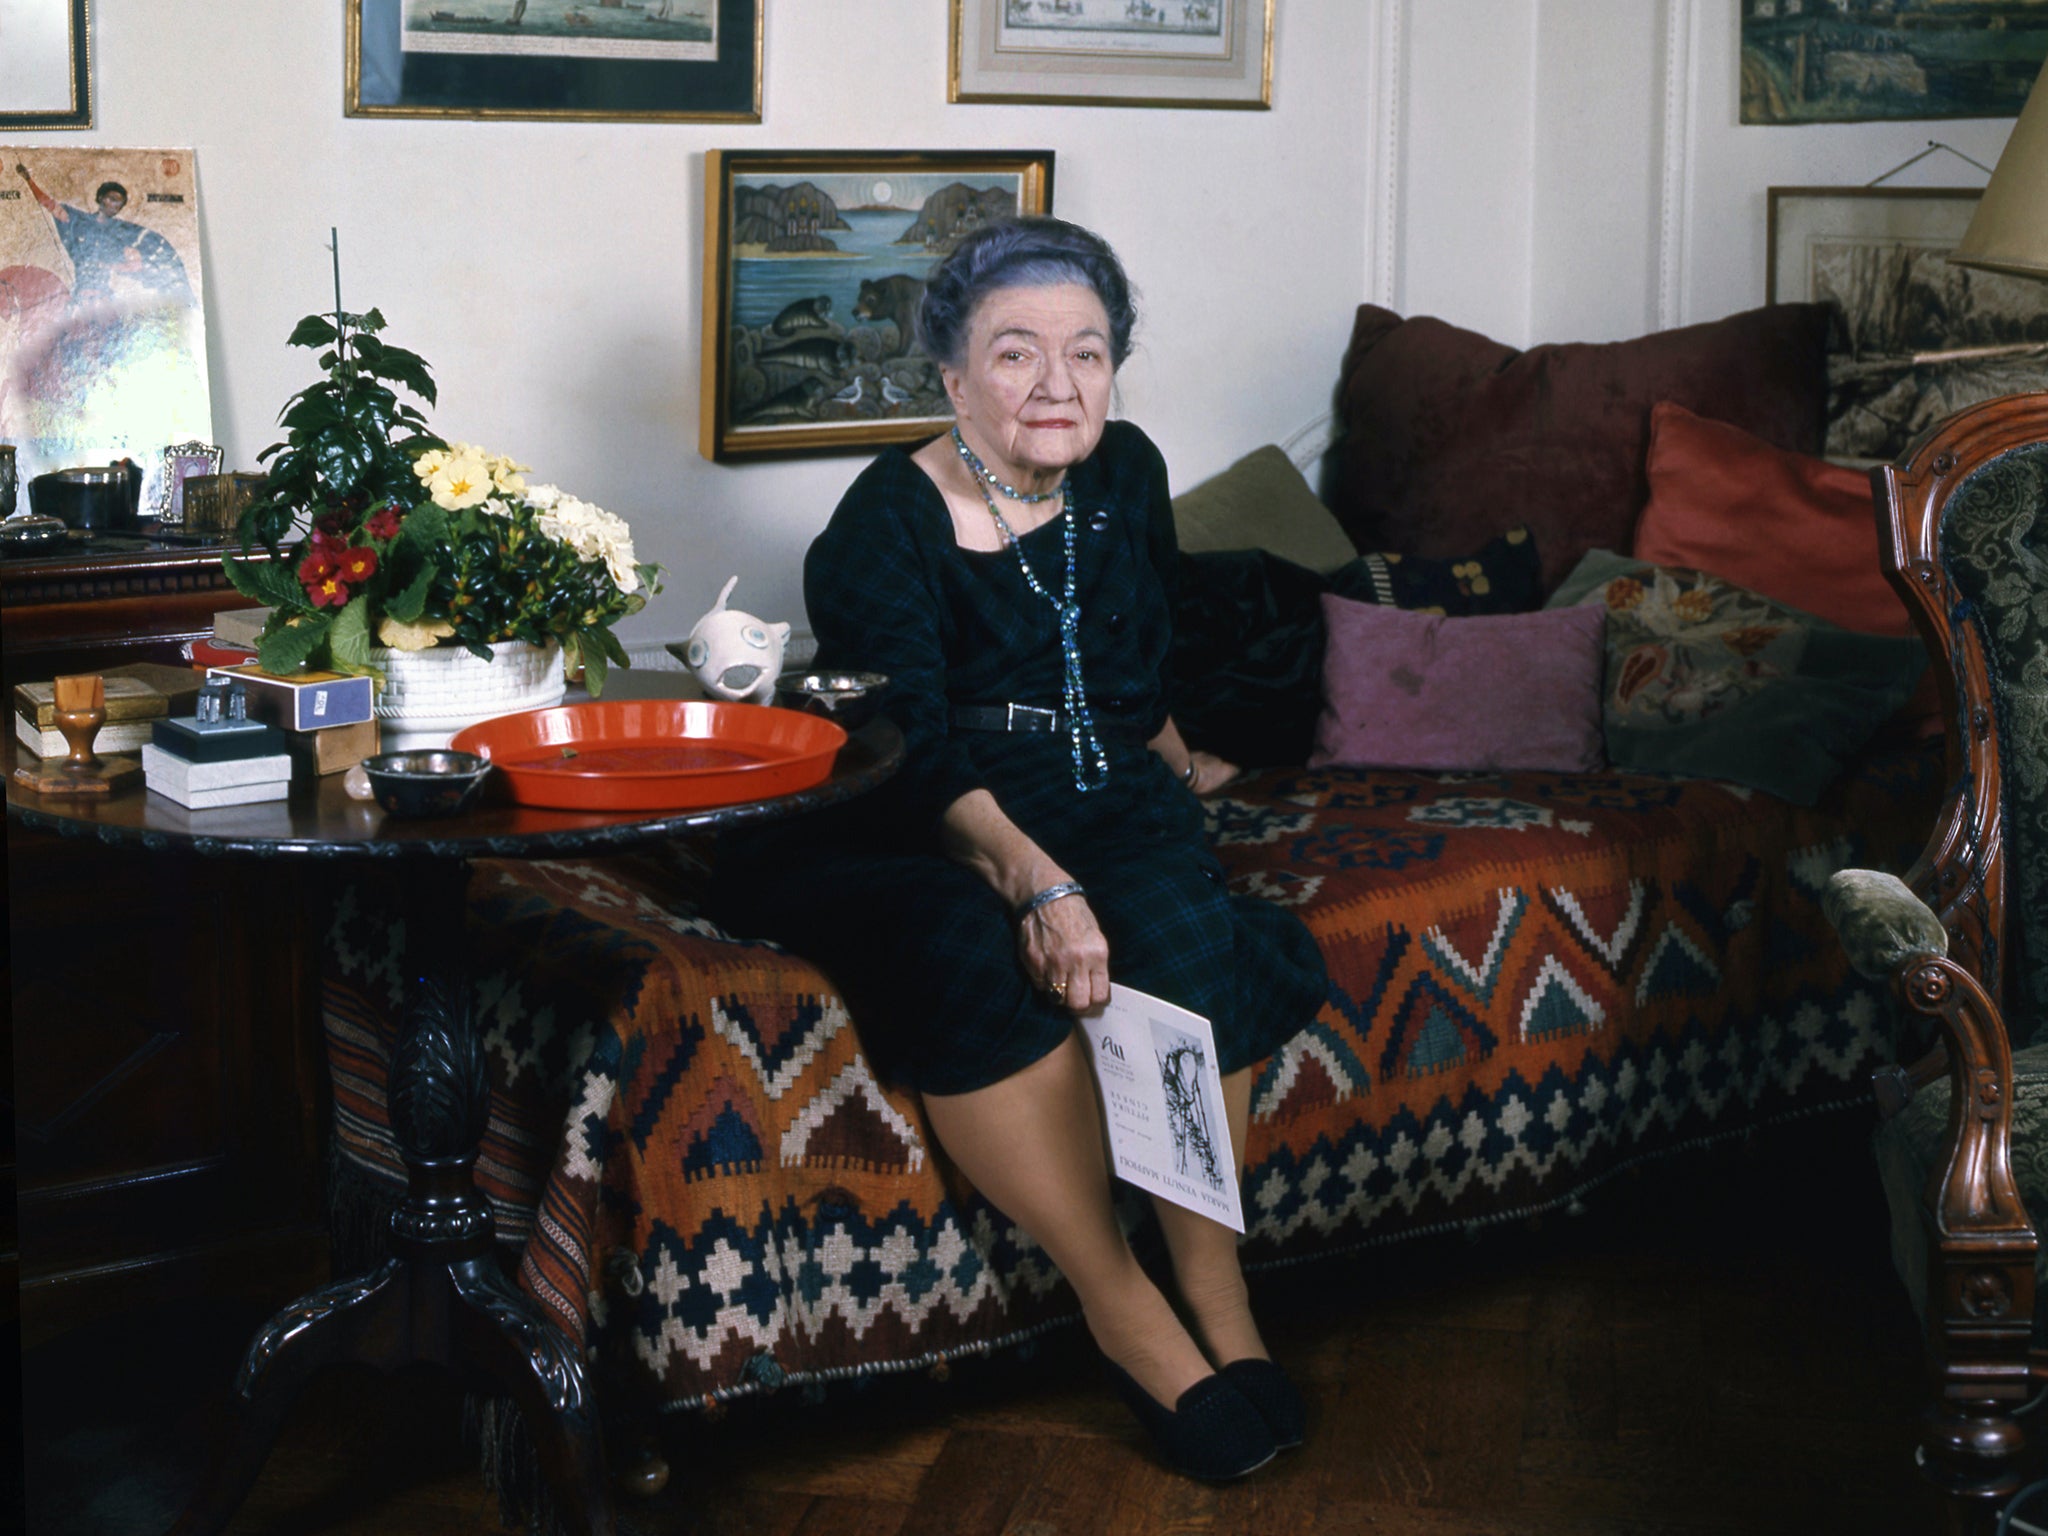 Moura Budberg returned to the Soviet Union seven times between 1959 and her death, aged
82, in 1974